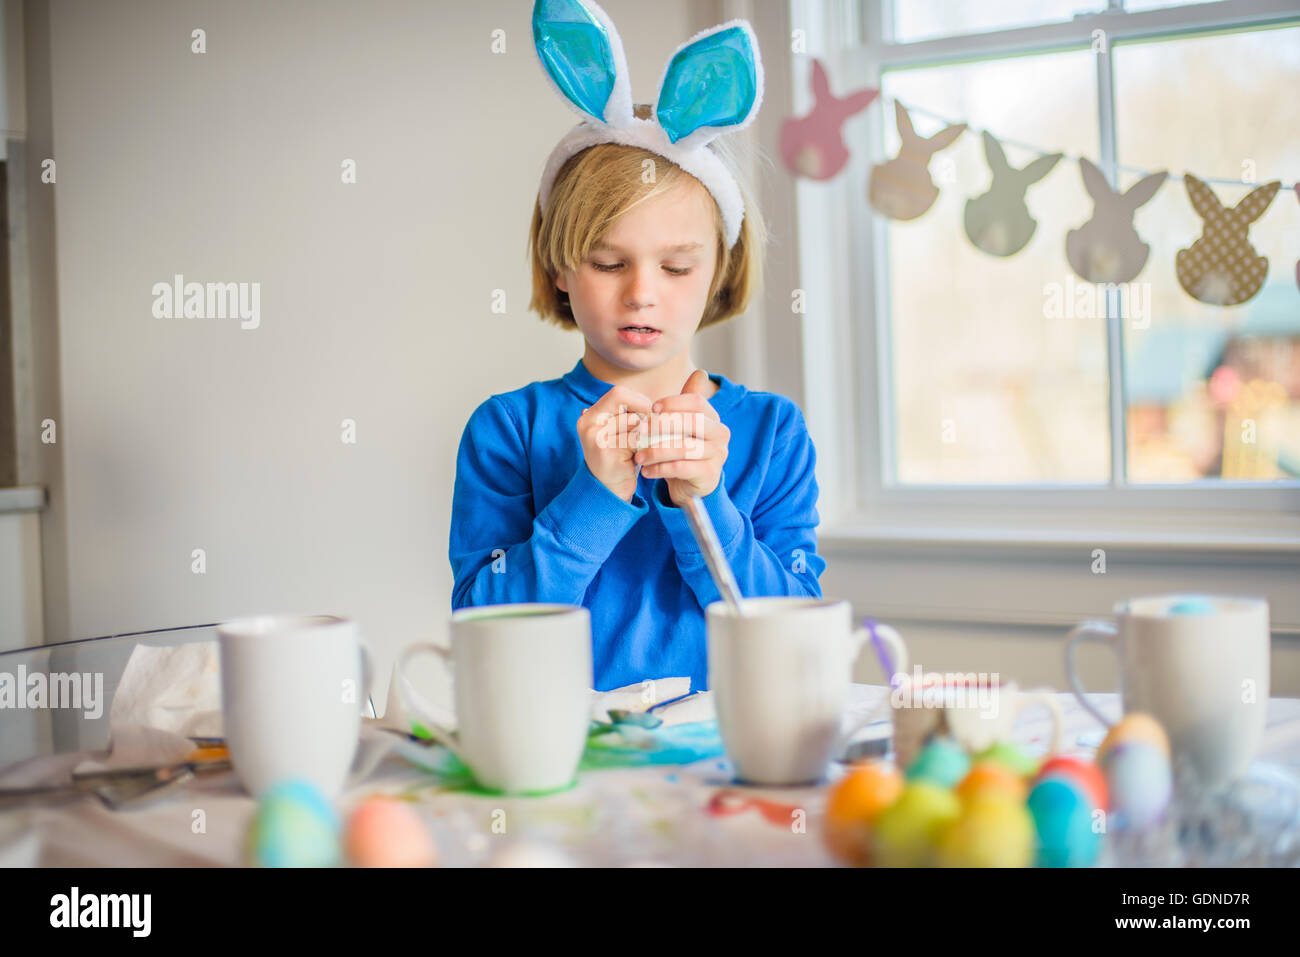 Boy at table wearing bunny ears decorating eggs for Easter Stock Photo